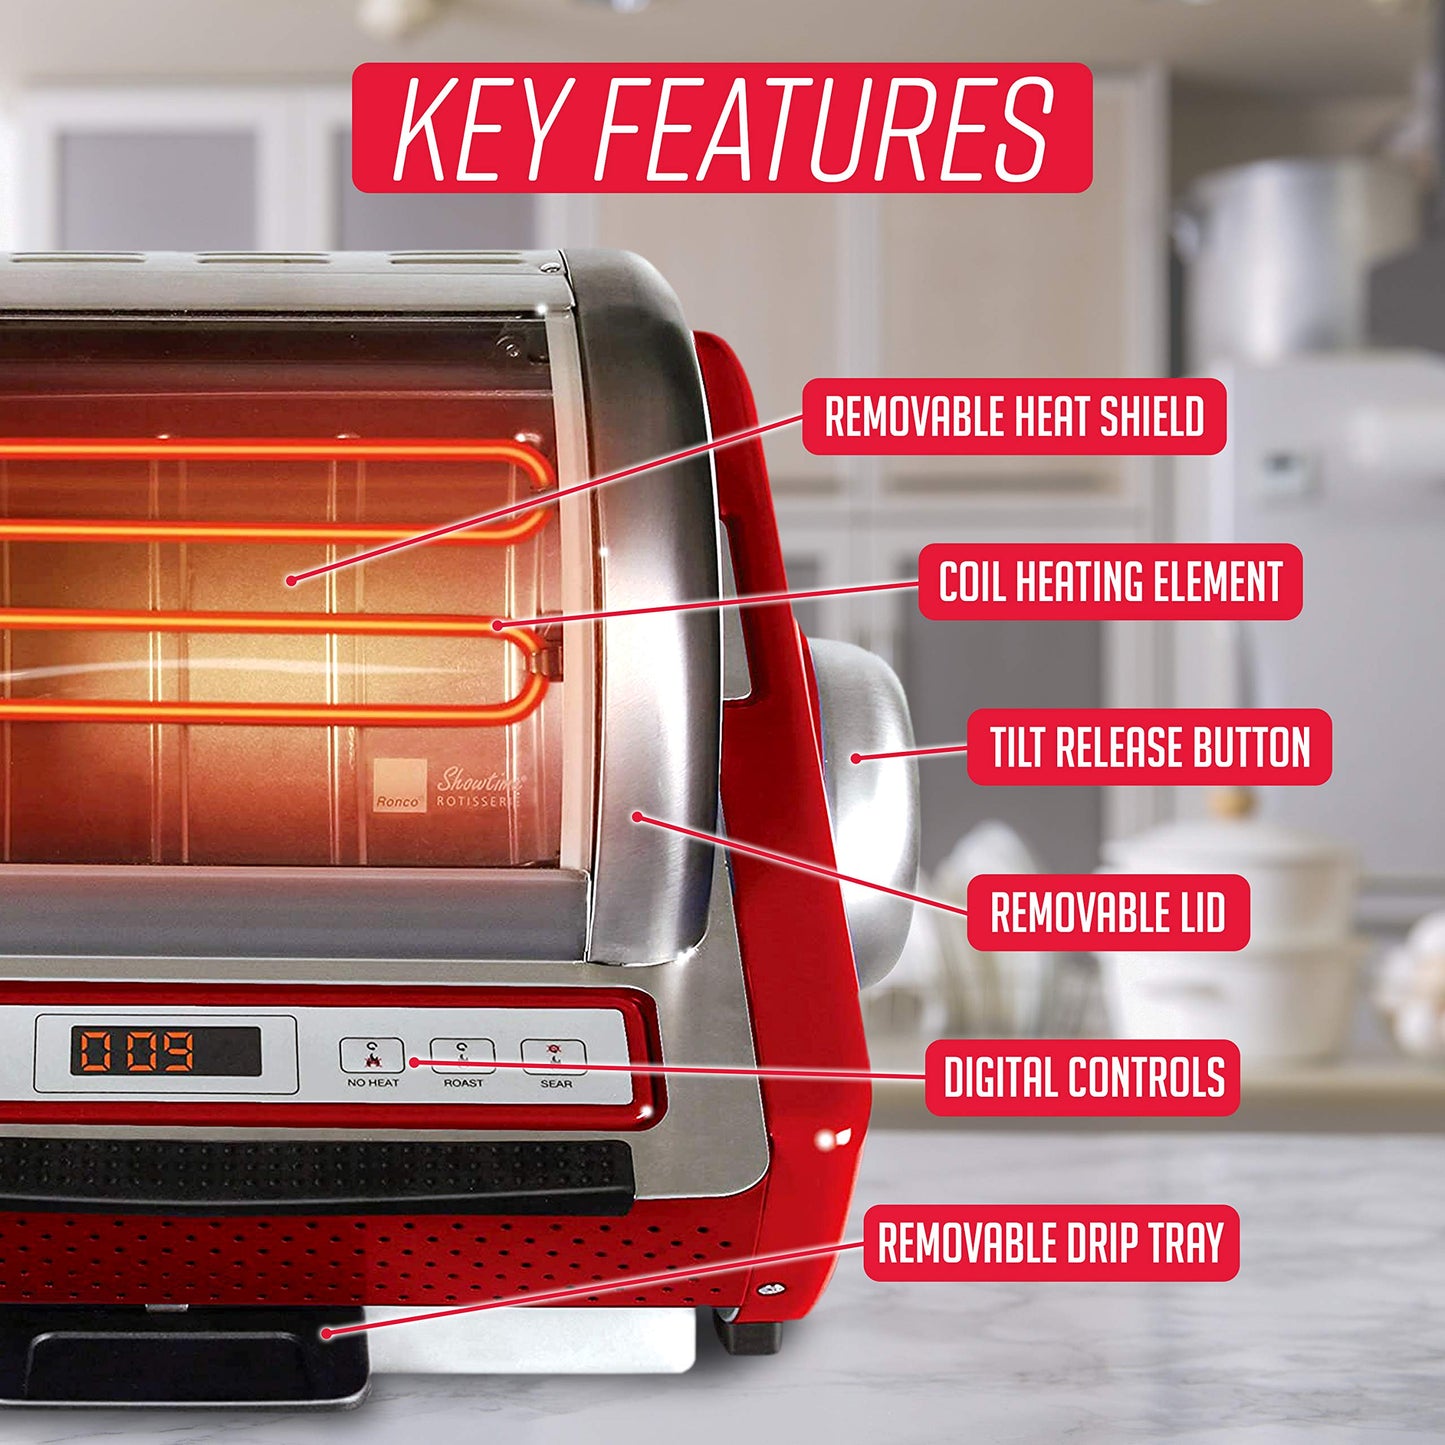 Ronco Showtime EZ-Store Large Capacity Rotisserie & BBQ Oven, Digital Controls, Compact Storage, Perfect Preset Rotation Speed, Self-Basting, Auto Shutoff, Includes Multipurpose Basket, red